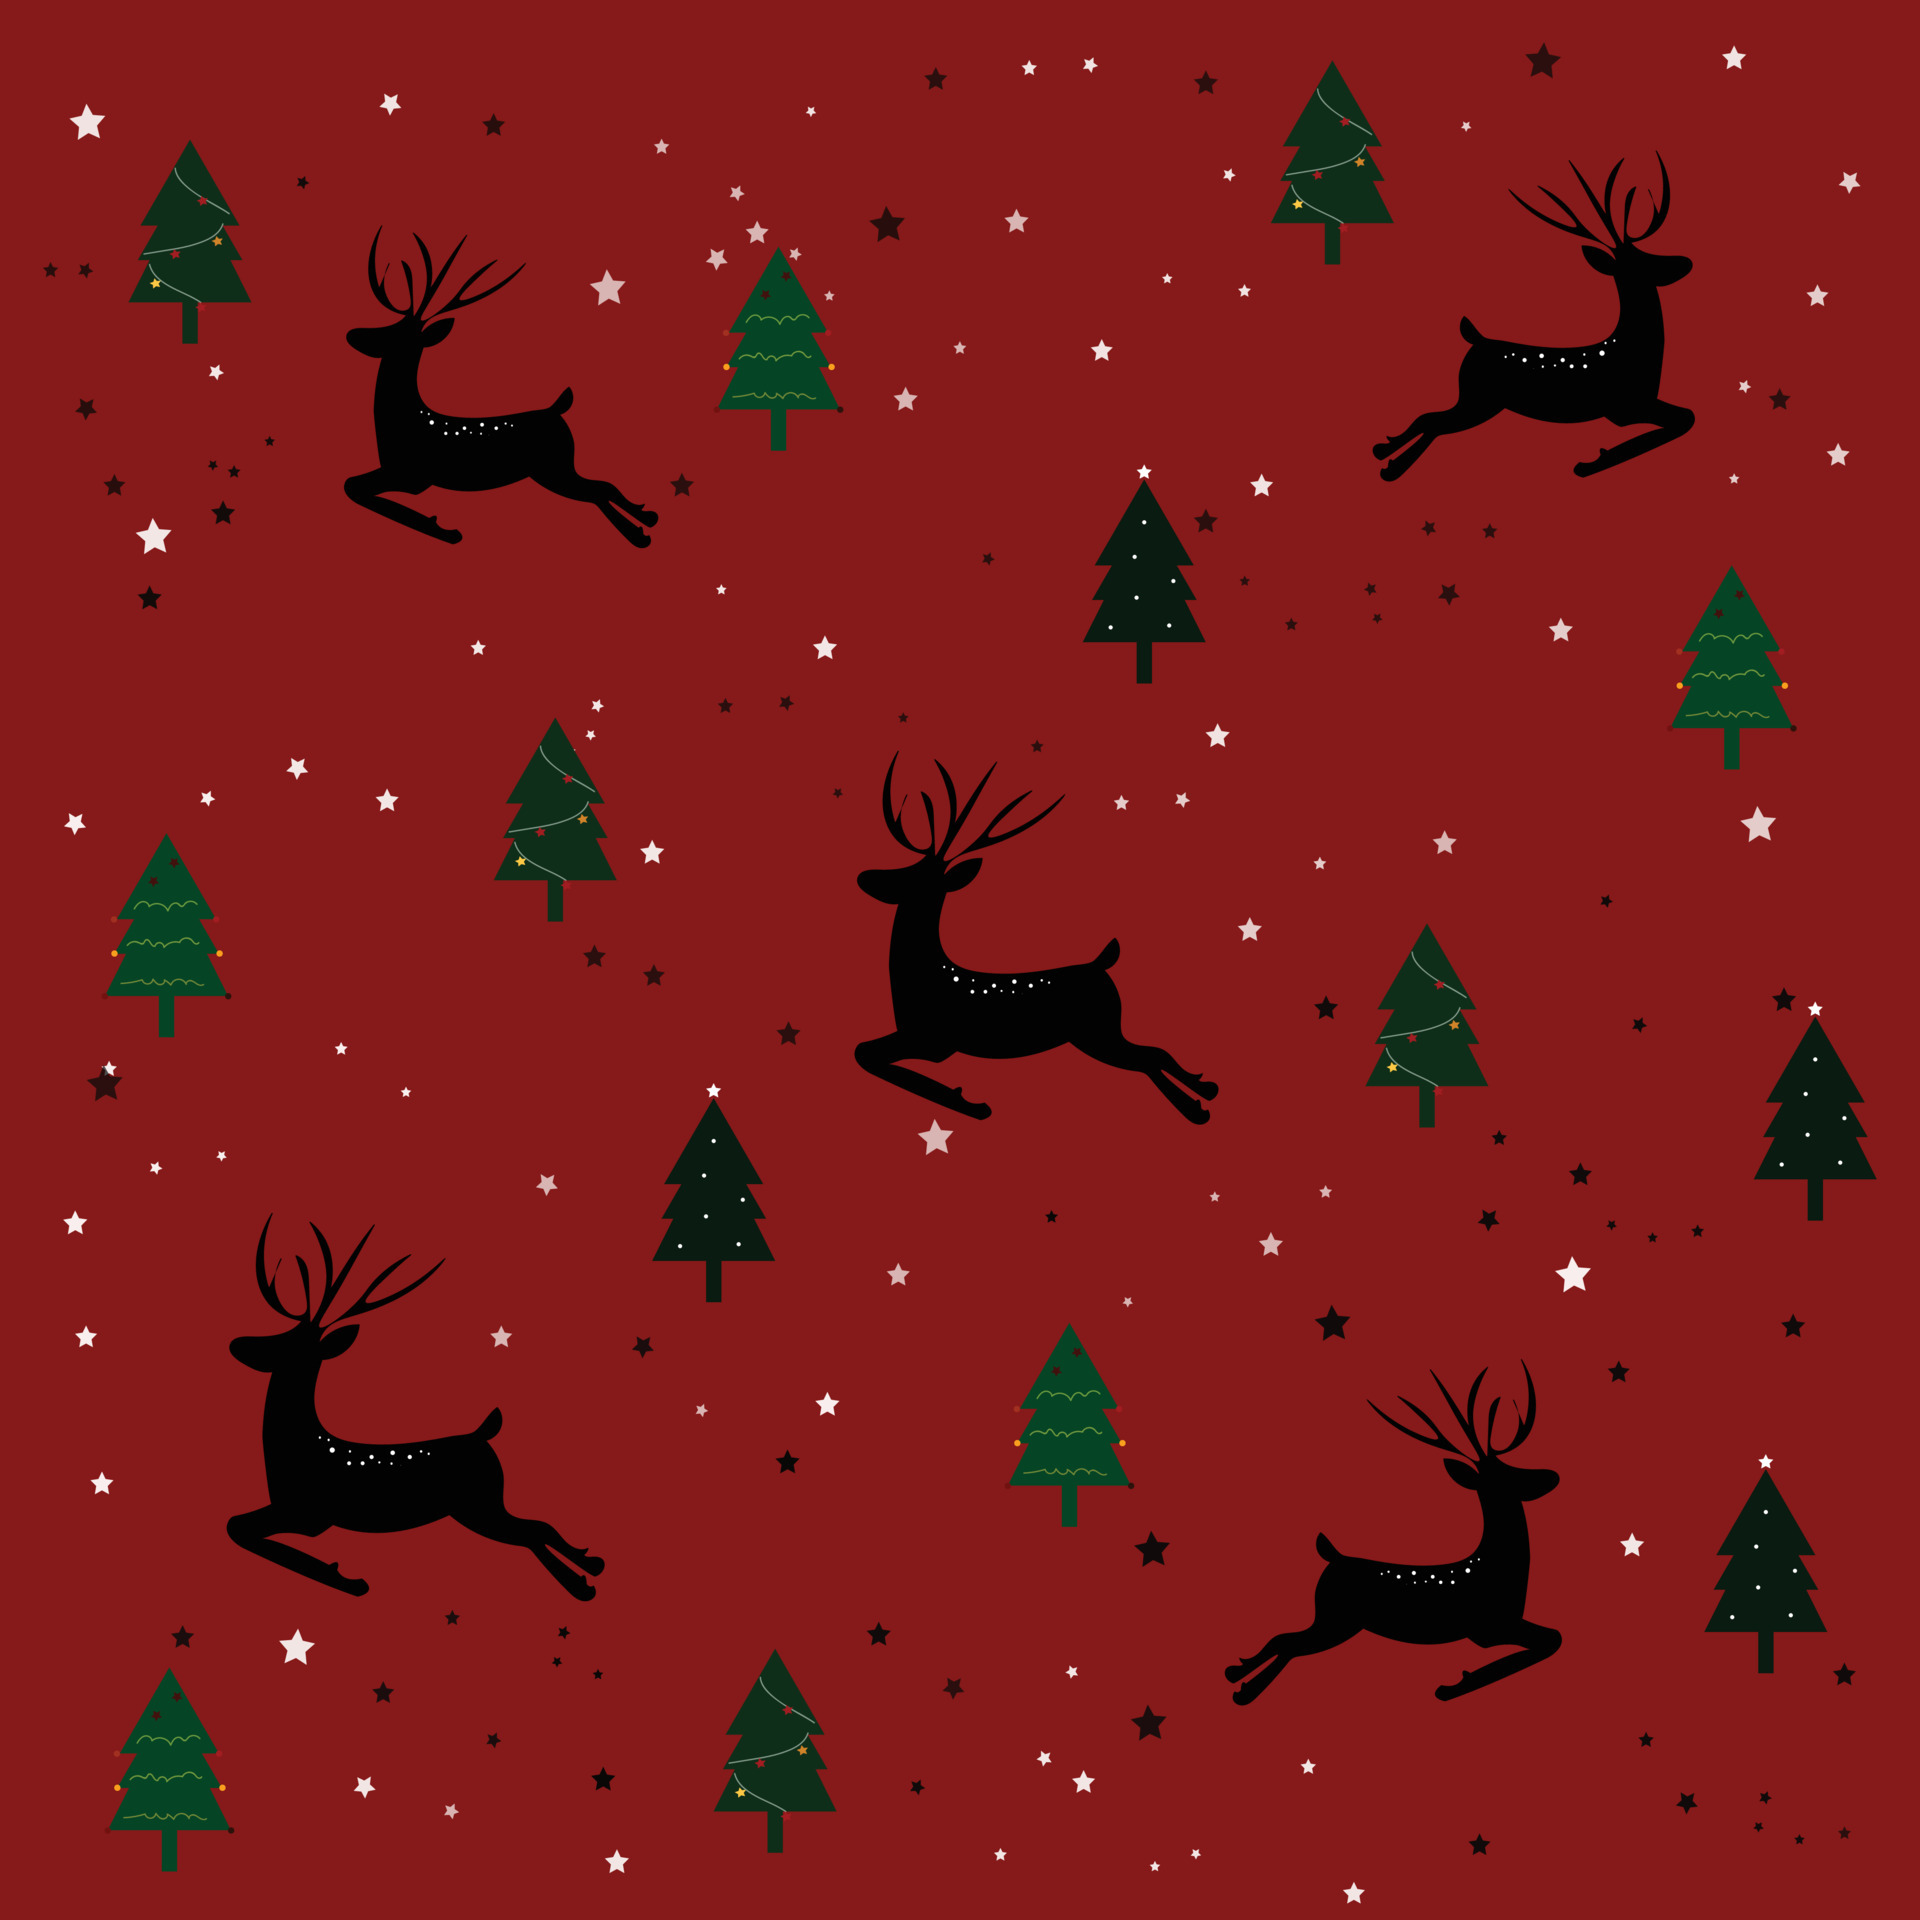 iPhone and Android Wallpapers Pretty Reindeer Wallpaper for iPhone and  Android  Рождественские обои Рождественские картины Рождественский фон